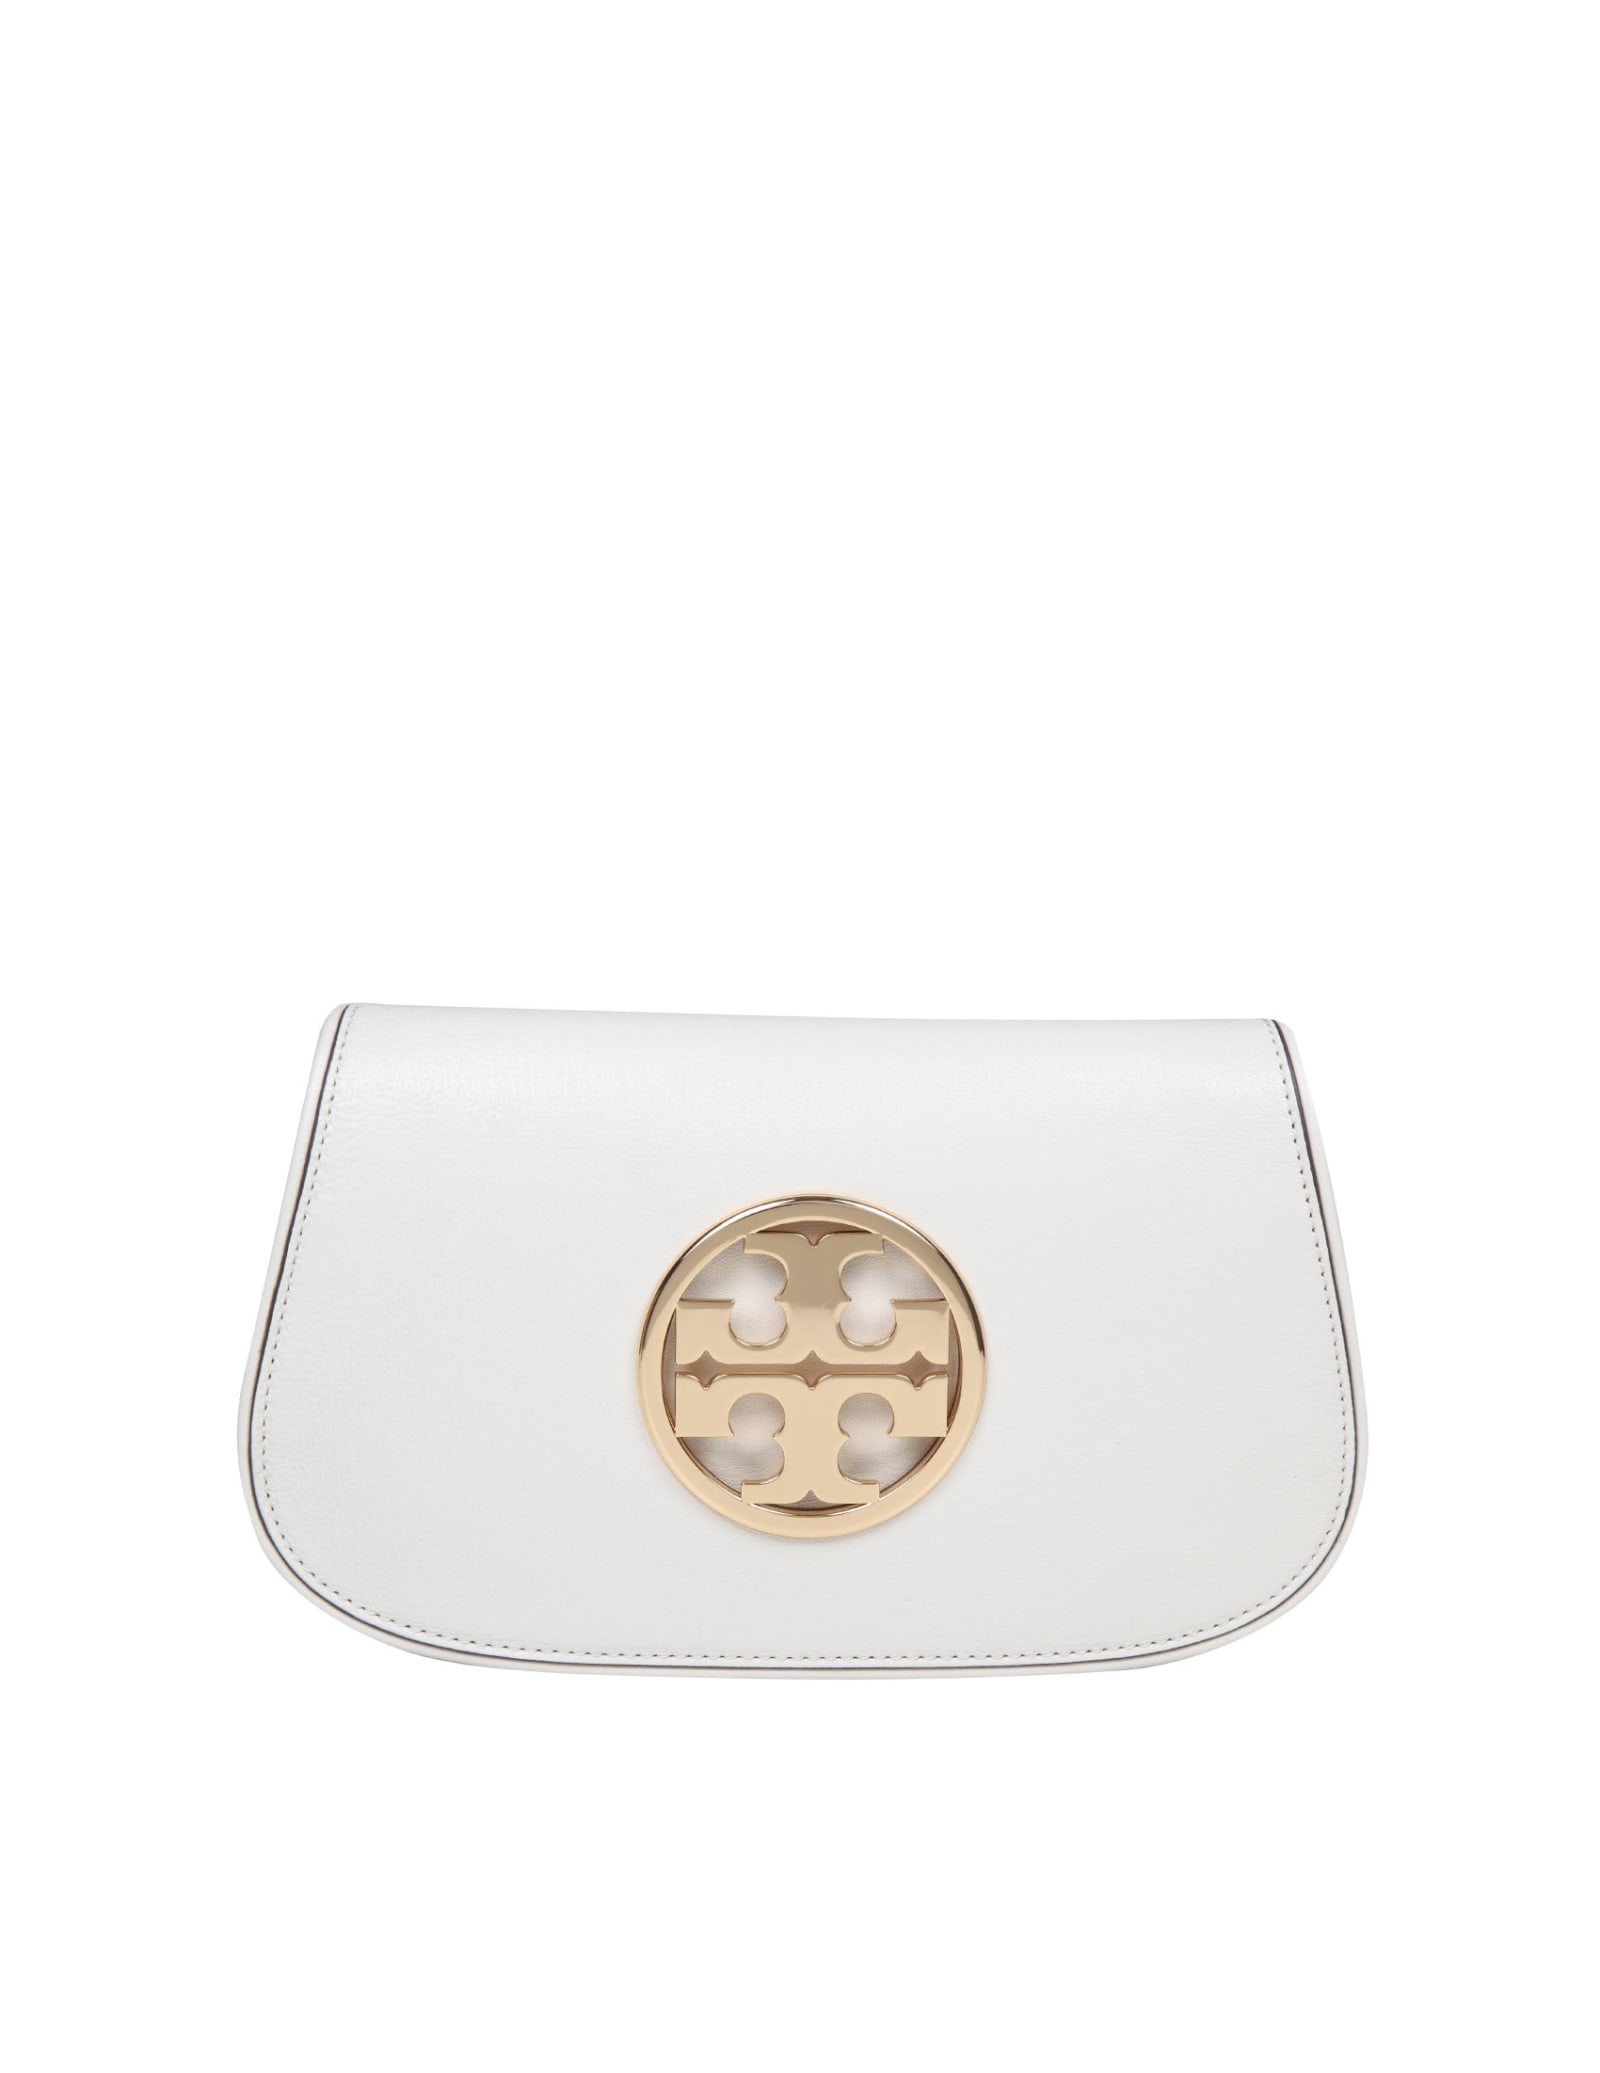 TORY BURCH REVA CLUTCH IN IVORY LEATHER